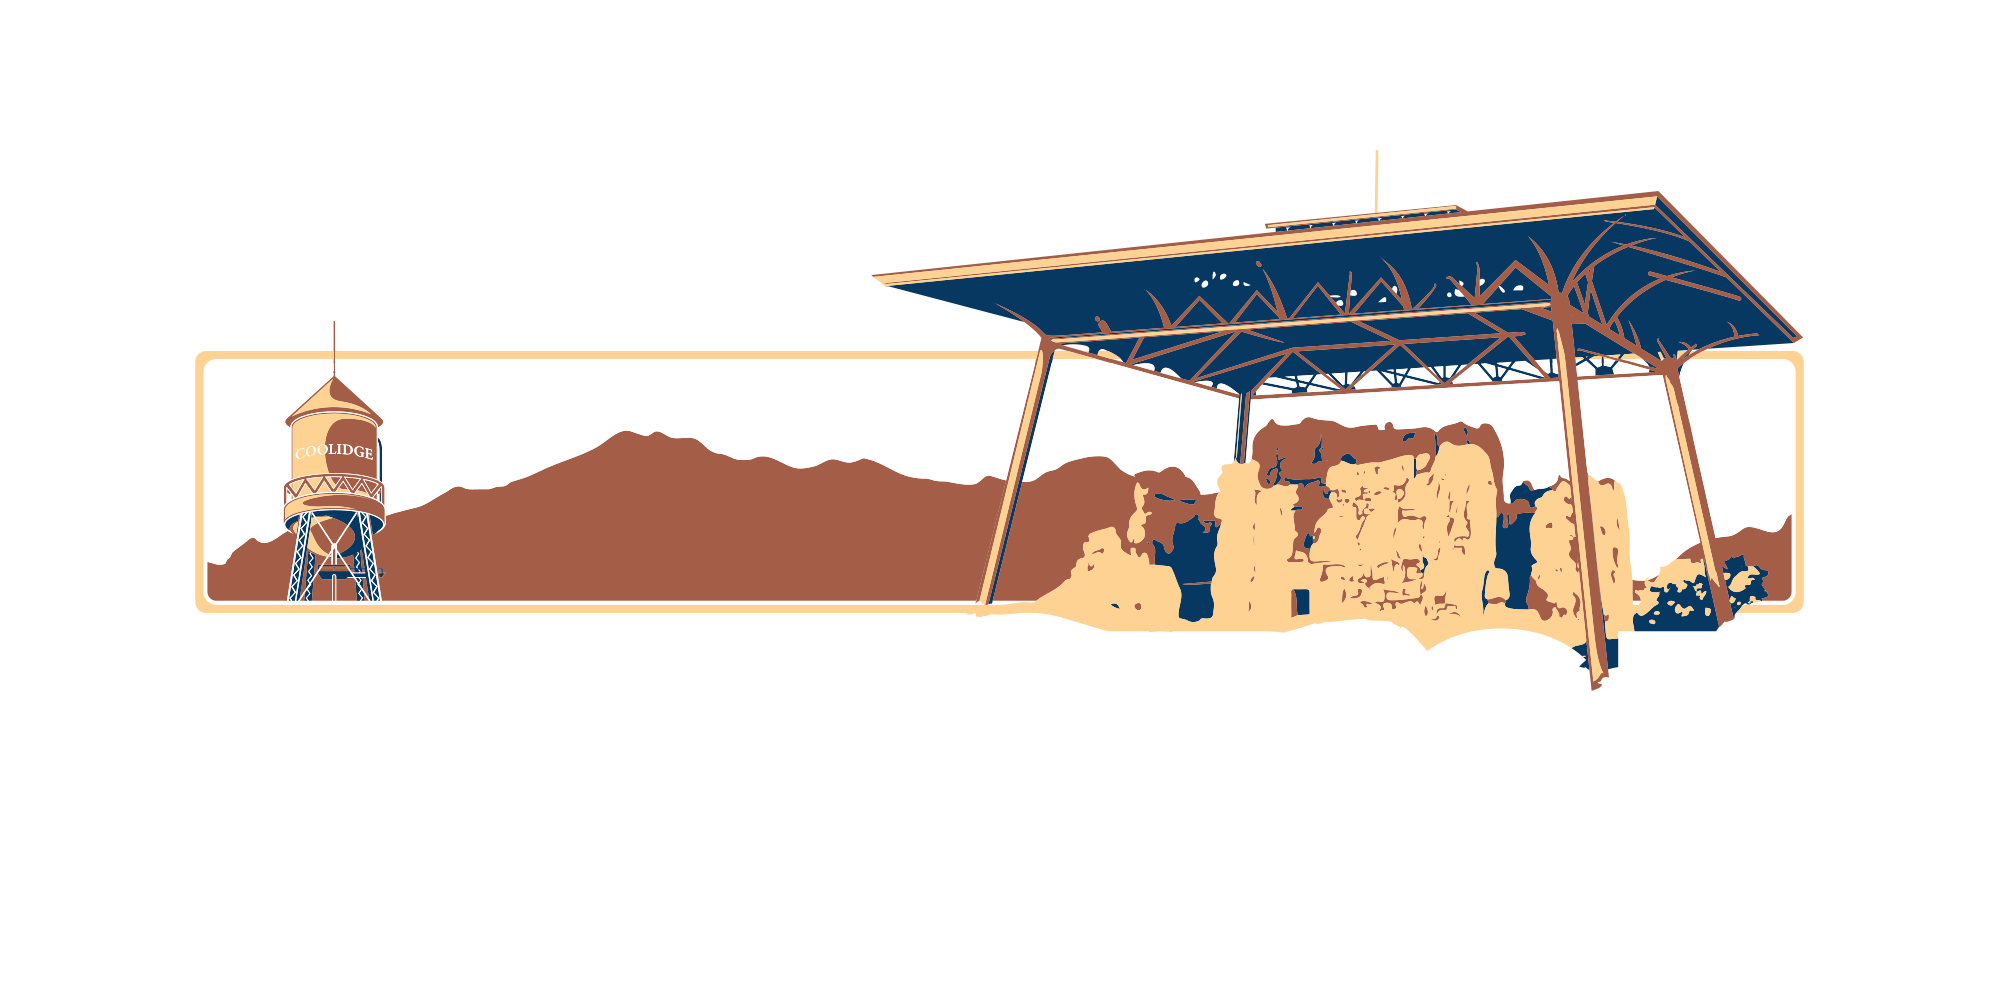 Coolidge Chamber of Commerce